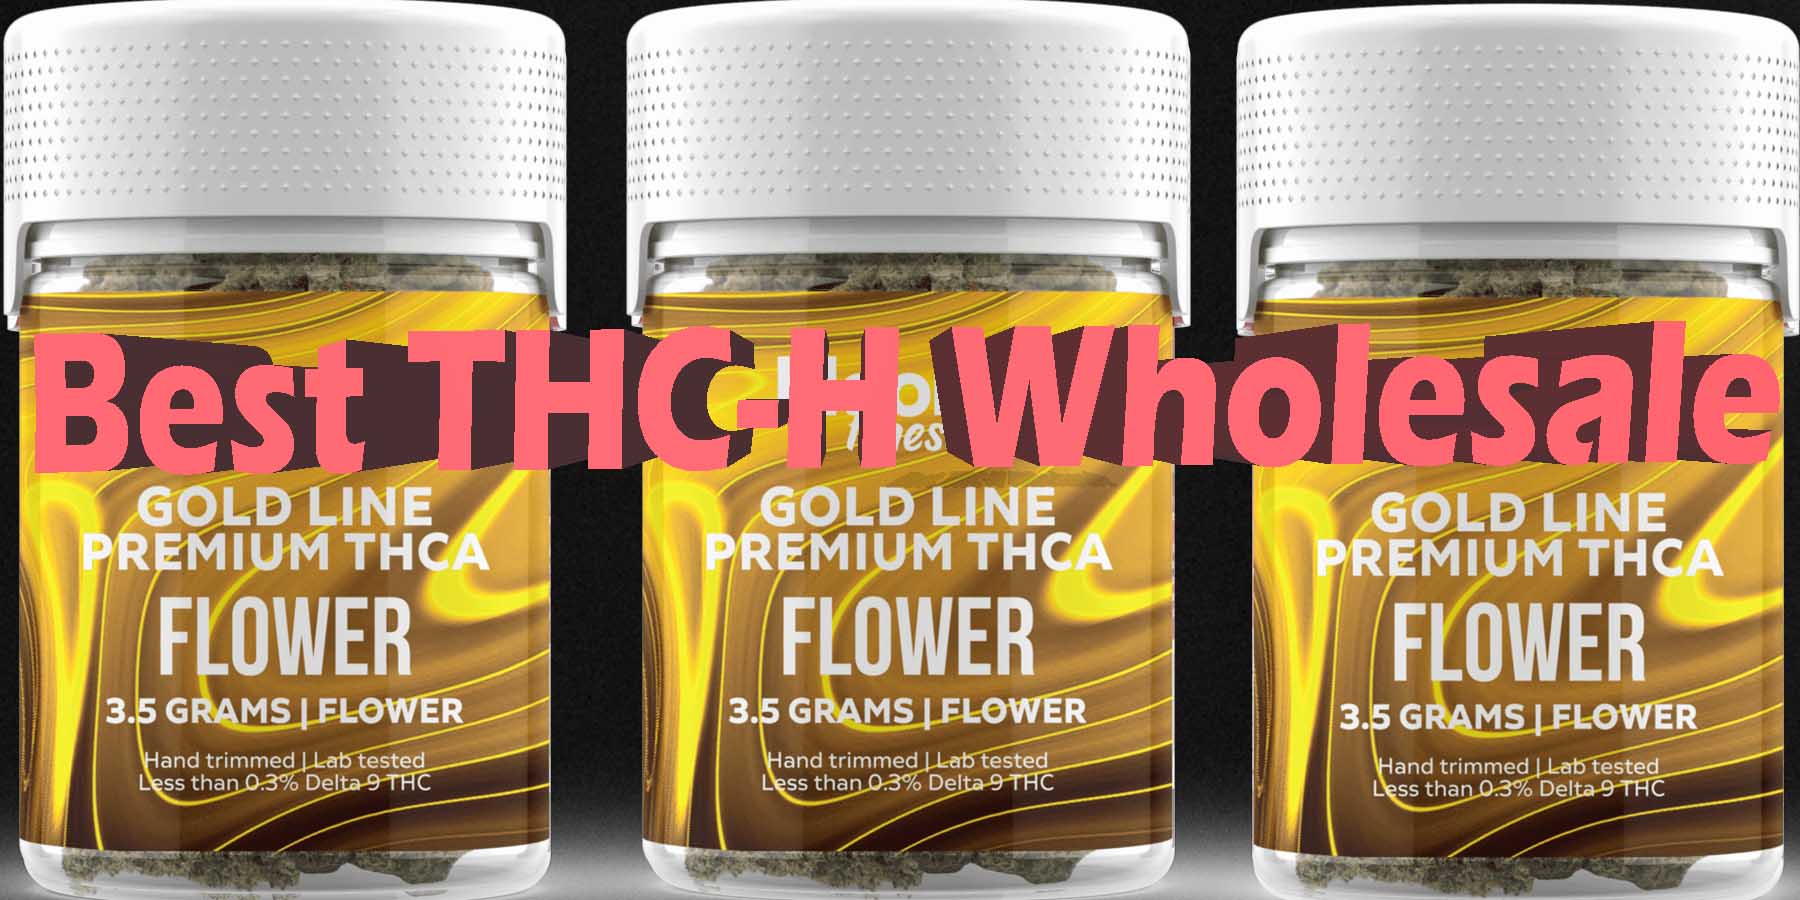 Best THC H Wholesale WhereToGet HowToGetNearMe BestPlace LowestPrice Coupon Discount For Smoking Best High Smoke Shop Online Near Me StrongestBrand BestBrand